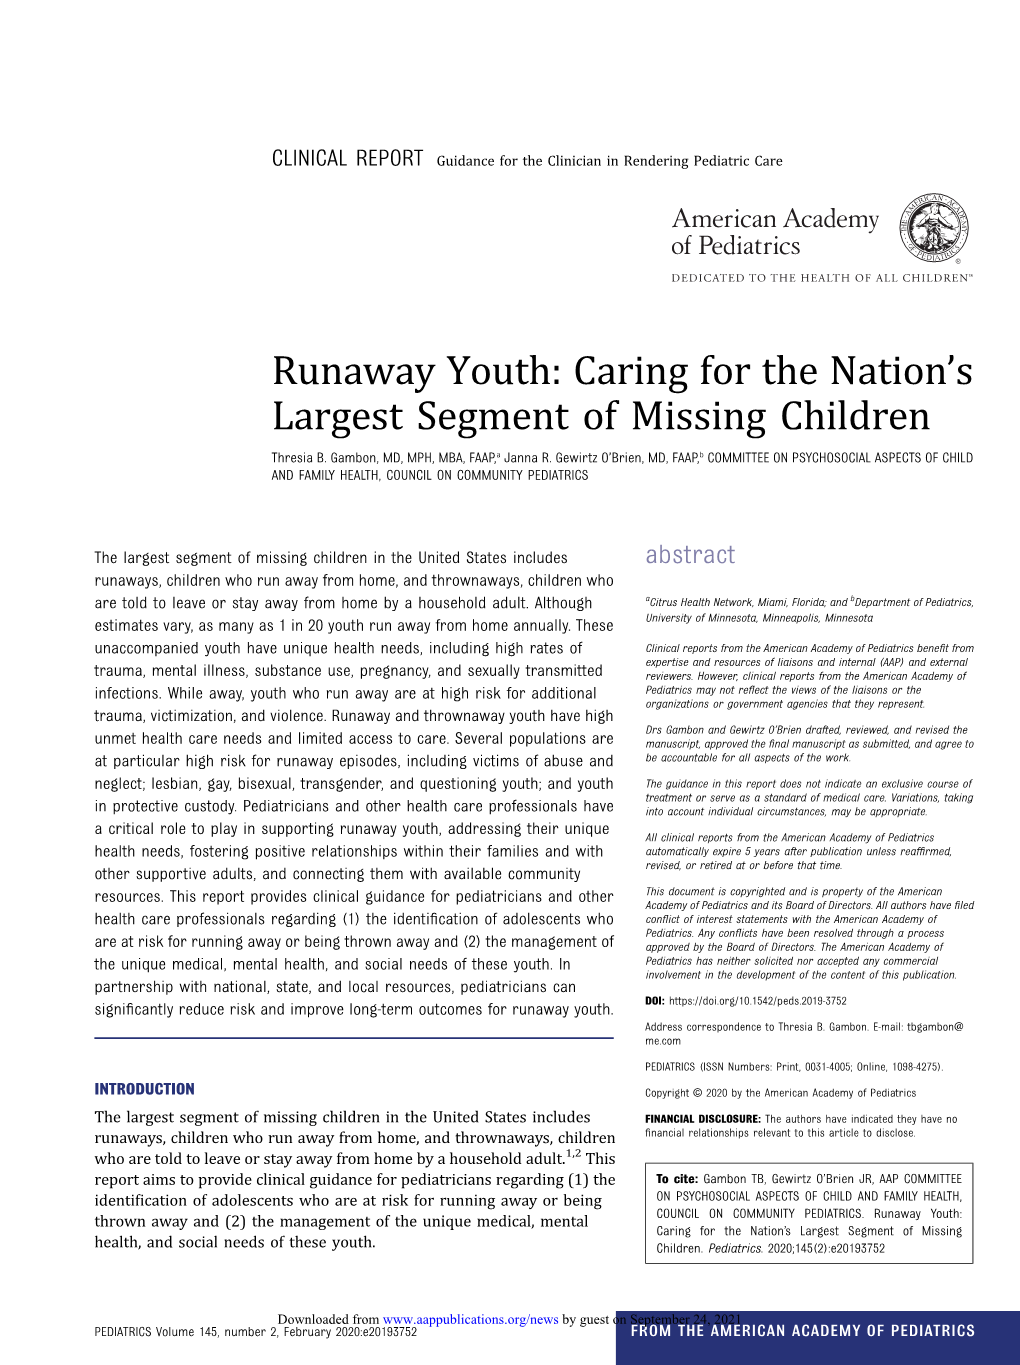 Runaway Youth: Caring for the Nation's Largest Segment of Missing Children Thresia B